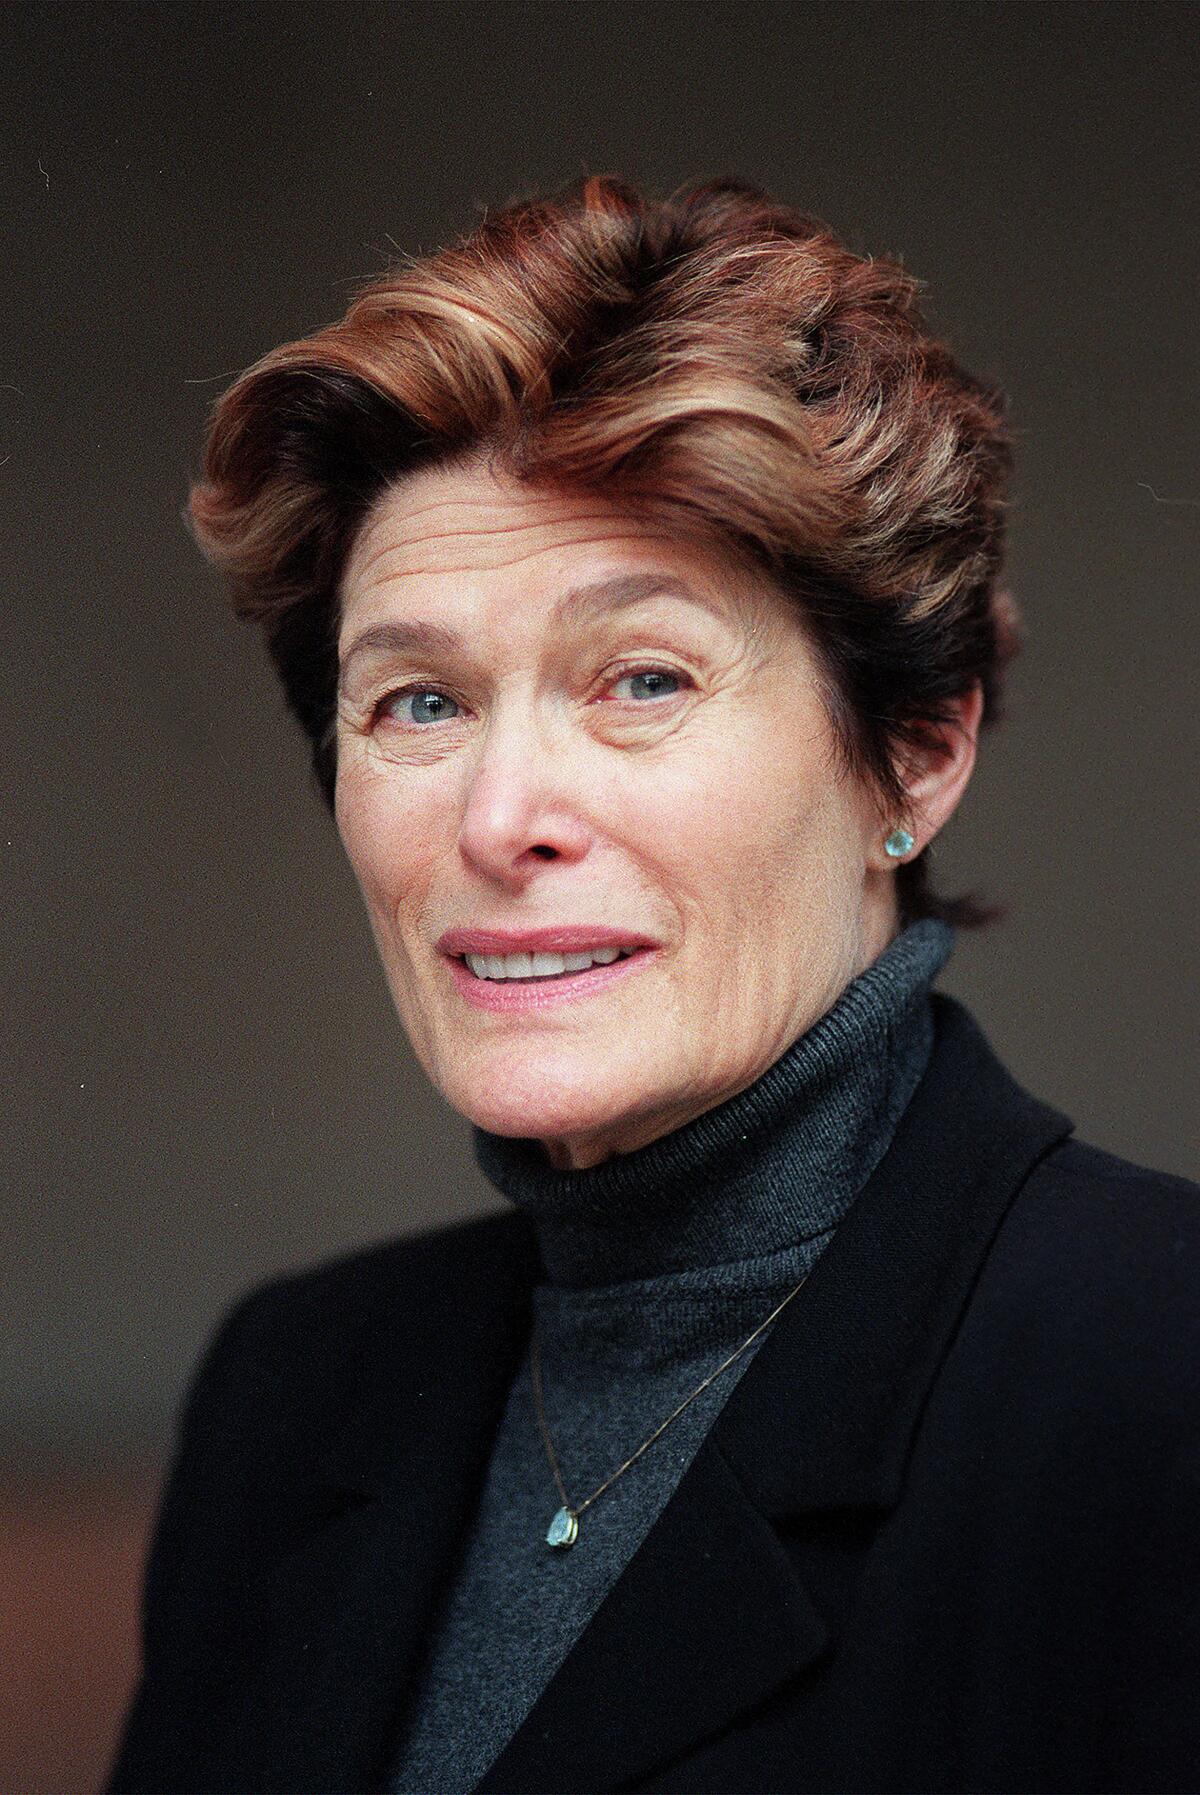 A woman with short brown hair, wearing a dark blazer over a turtleneck, smiles at the camera.